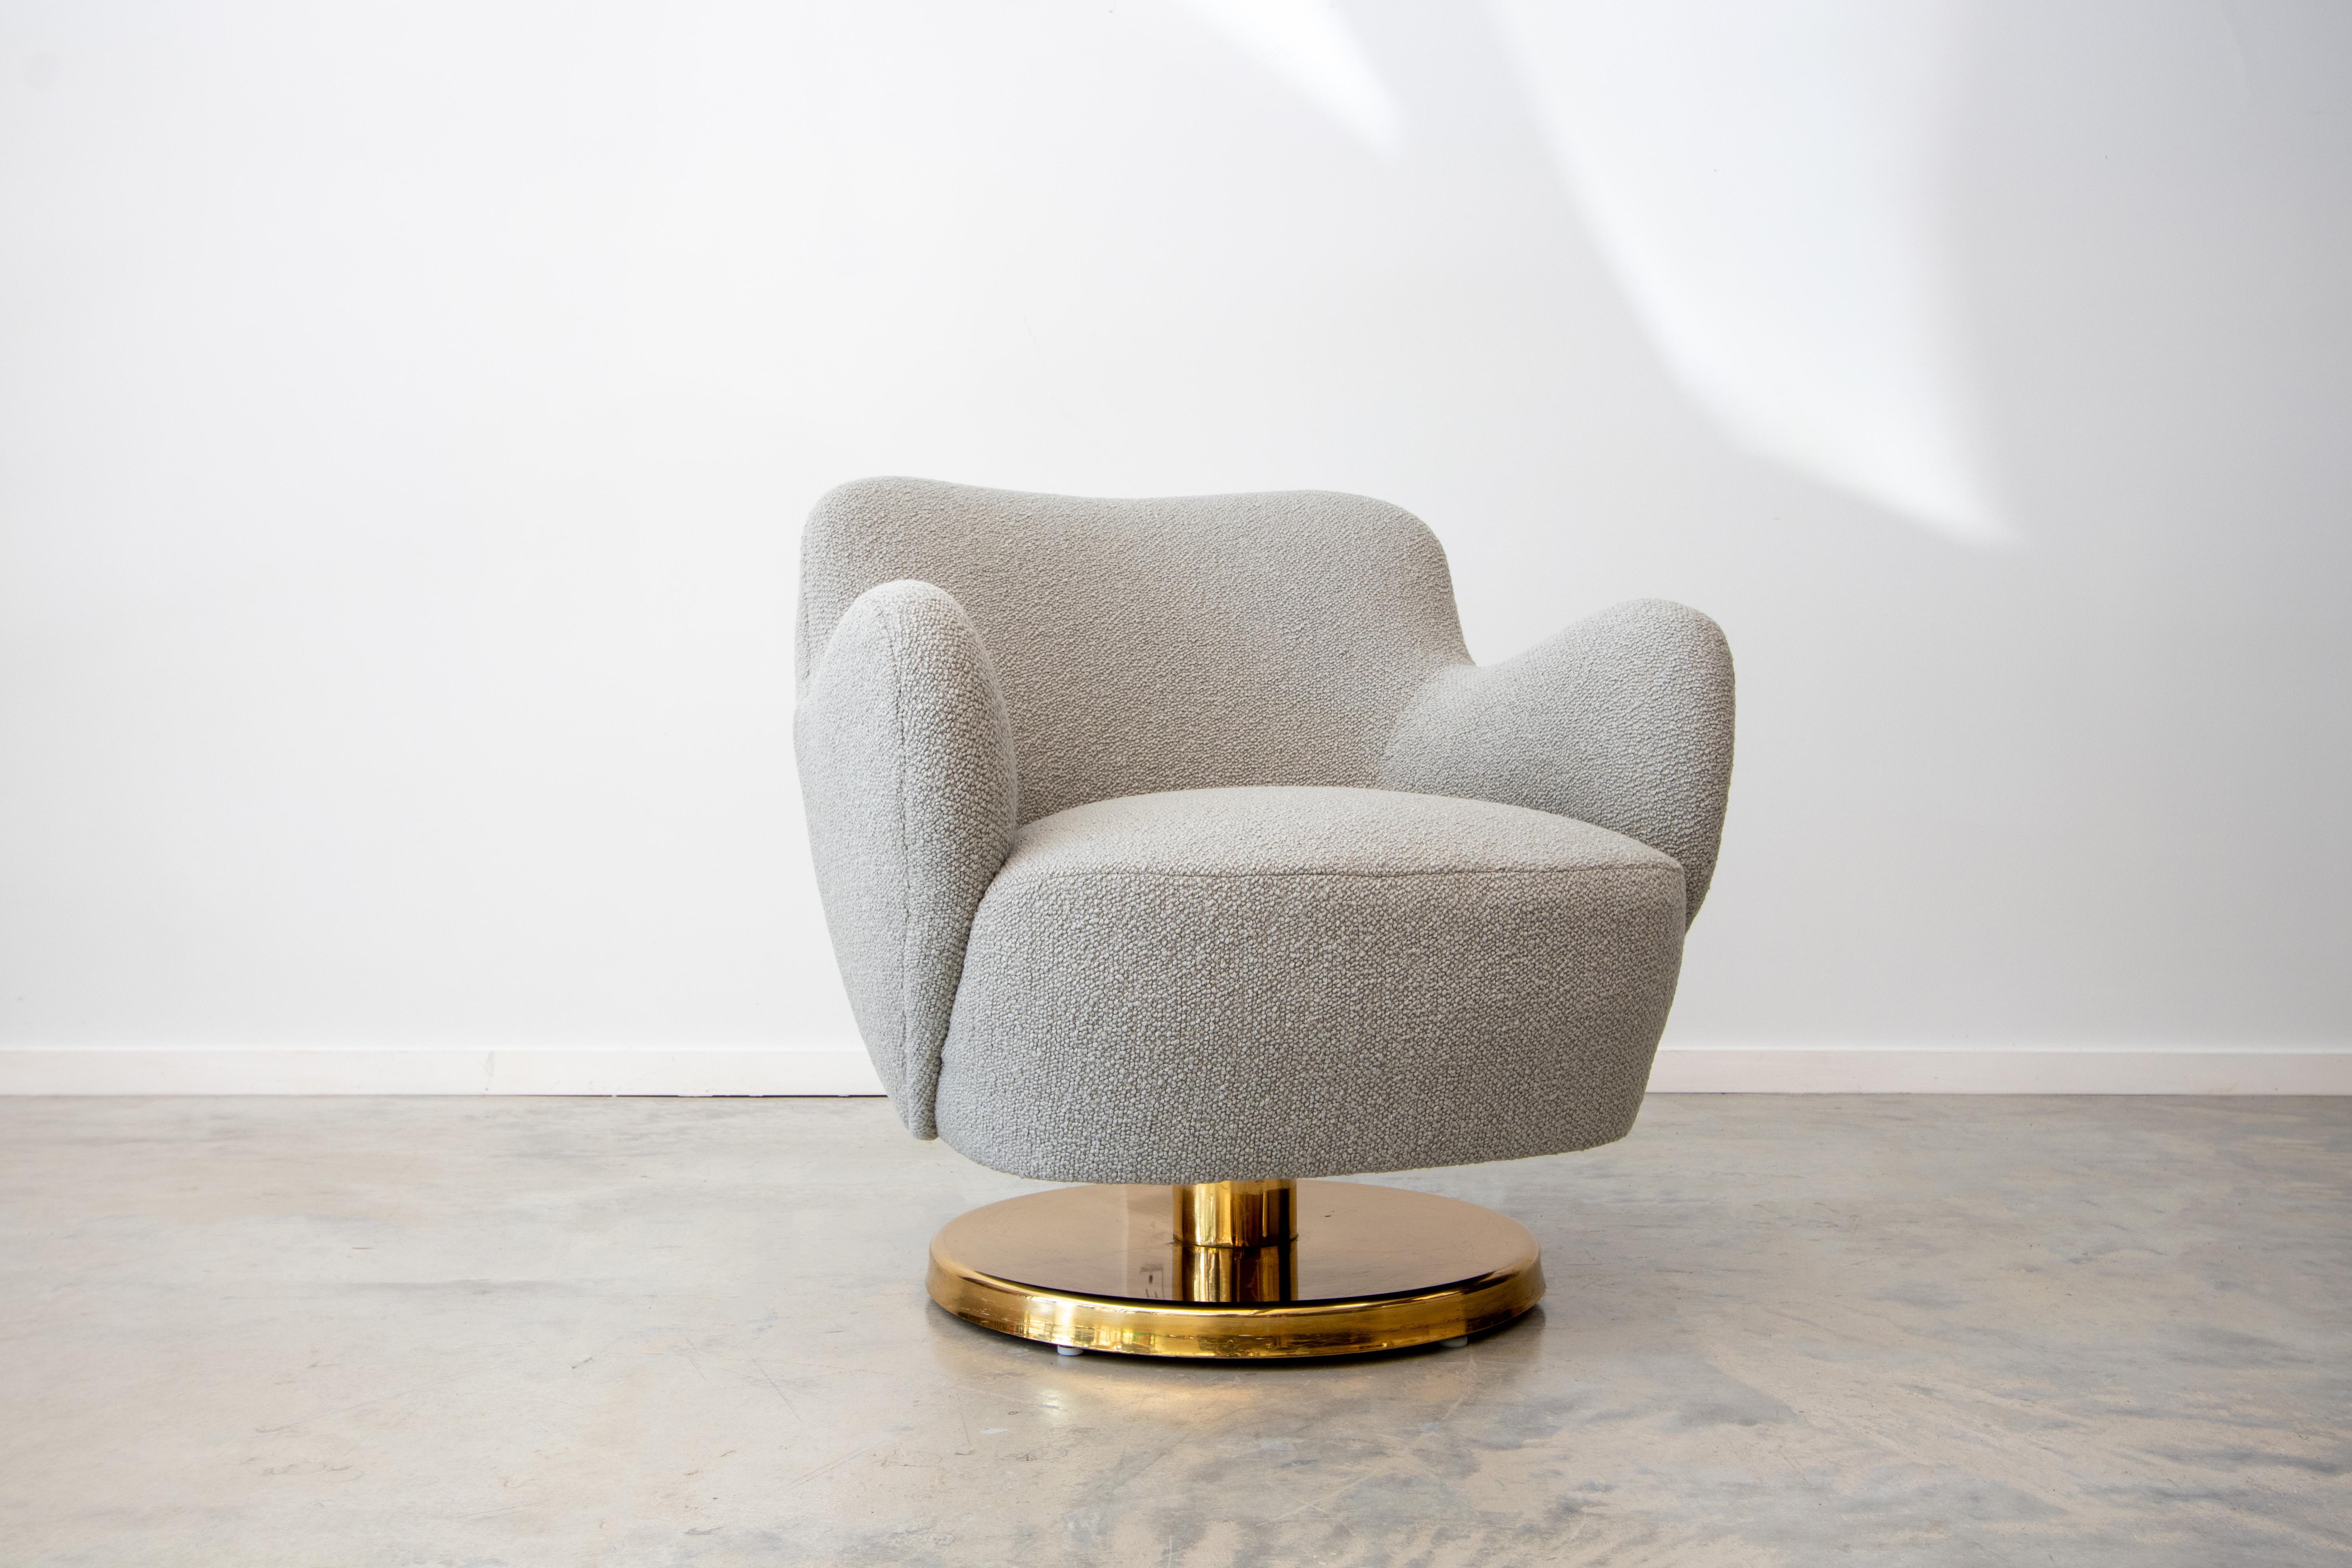 A unique swivel and rocking chair on a brass pedestal base designed by Vladimir Kagan and produced by Kagan-Dreyfuss Inc. This is the model 100a chair originally designed in 1947 but the design was modified by Vladimir Kagan in 1965 to have a brass